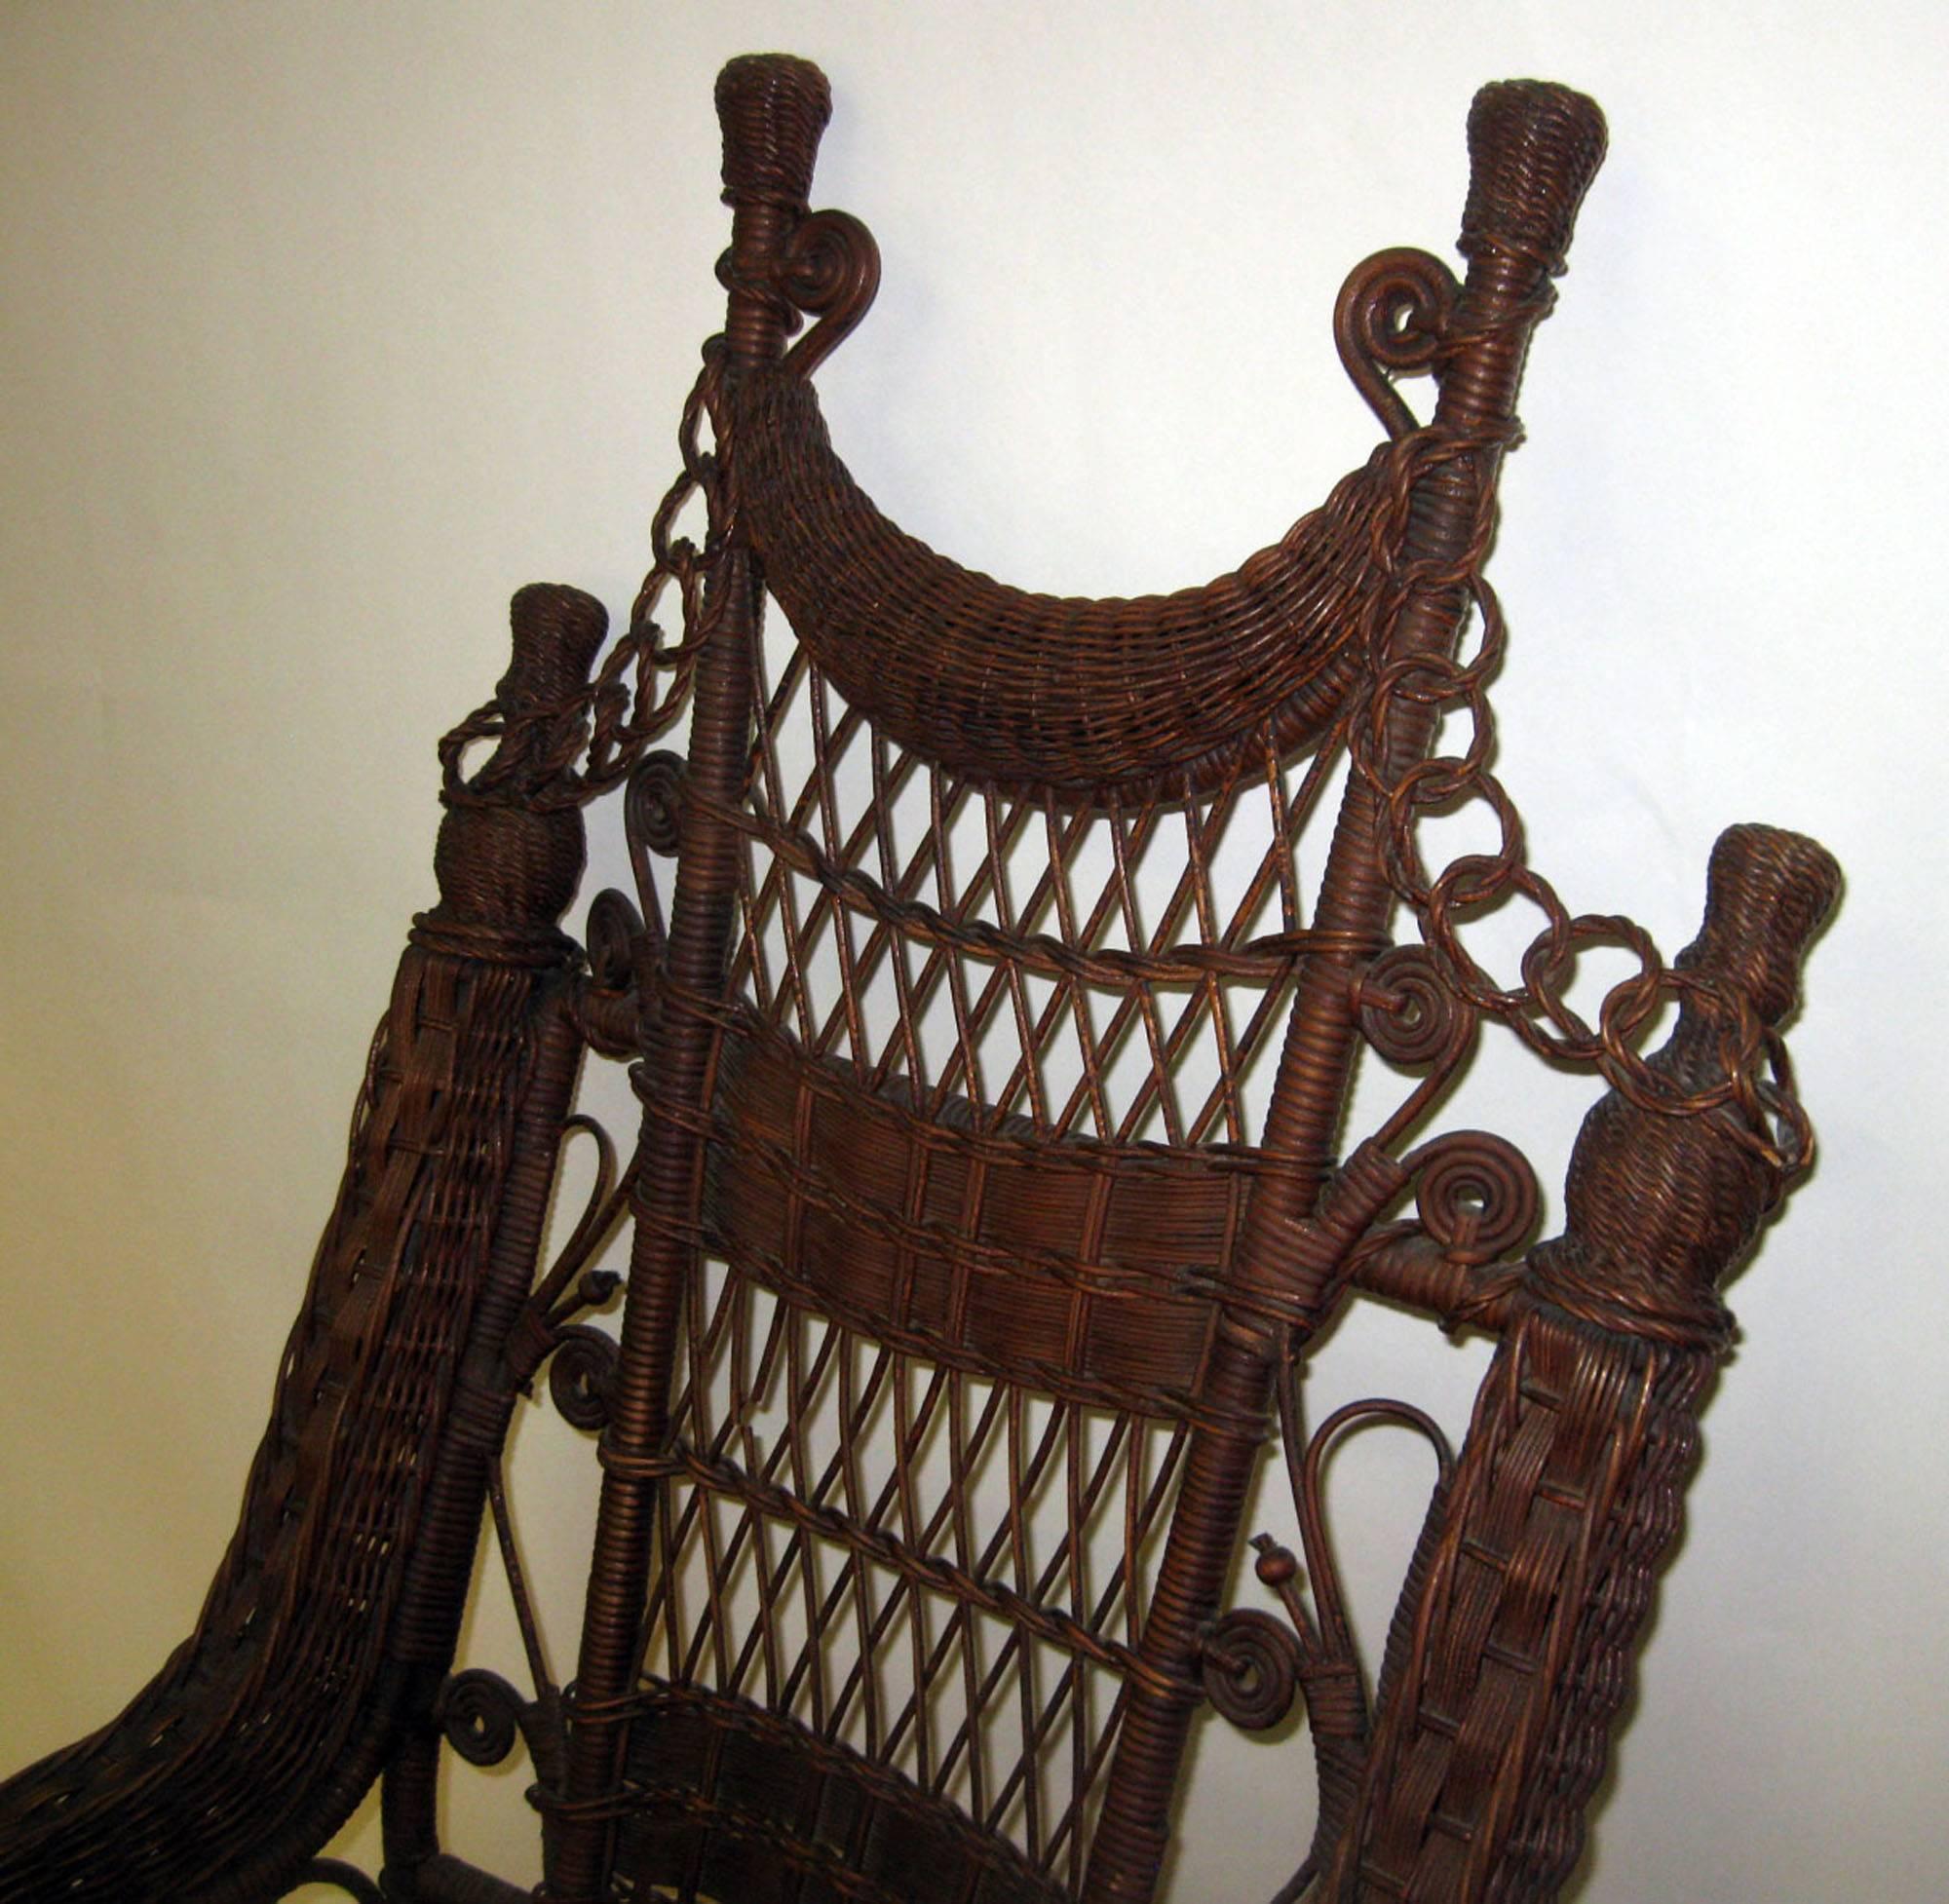 Although unlabeled, this is a high quality design and typical of those made by the firm of Heywood Brothers & Company. This company tended to design wicker pieces of a more airy and detailed style than its chief competitor, the Wakefield Rattan